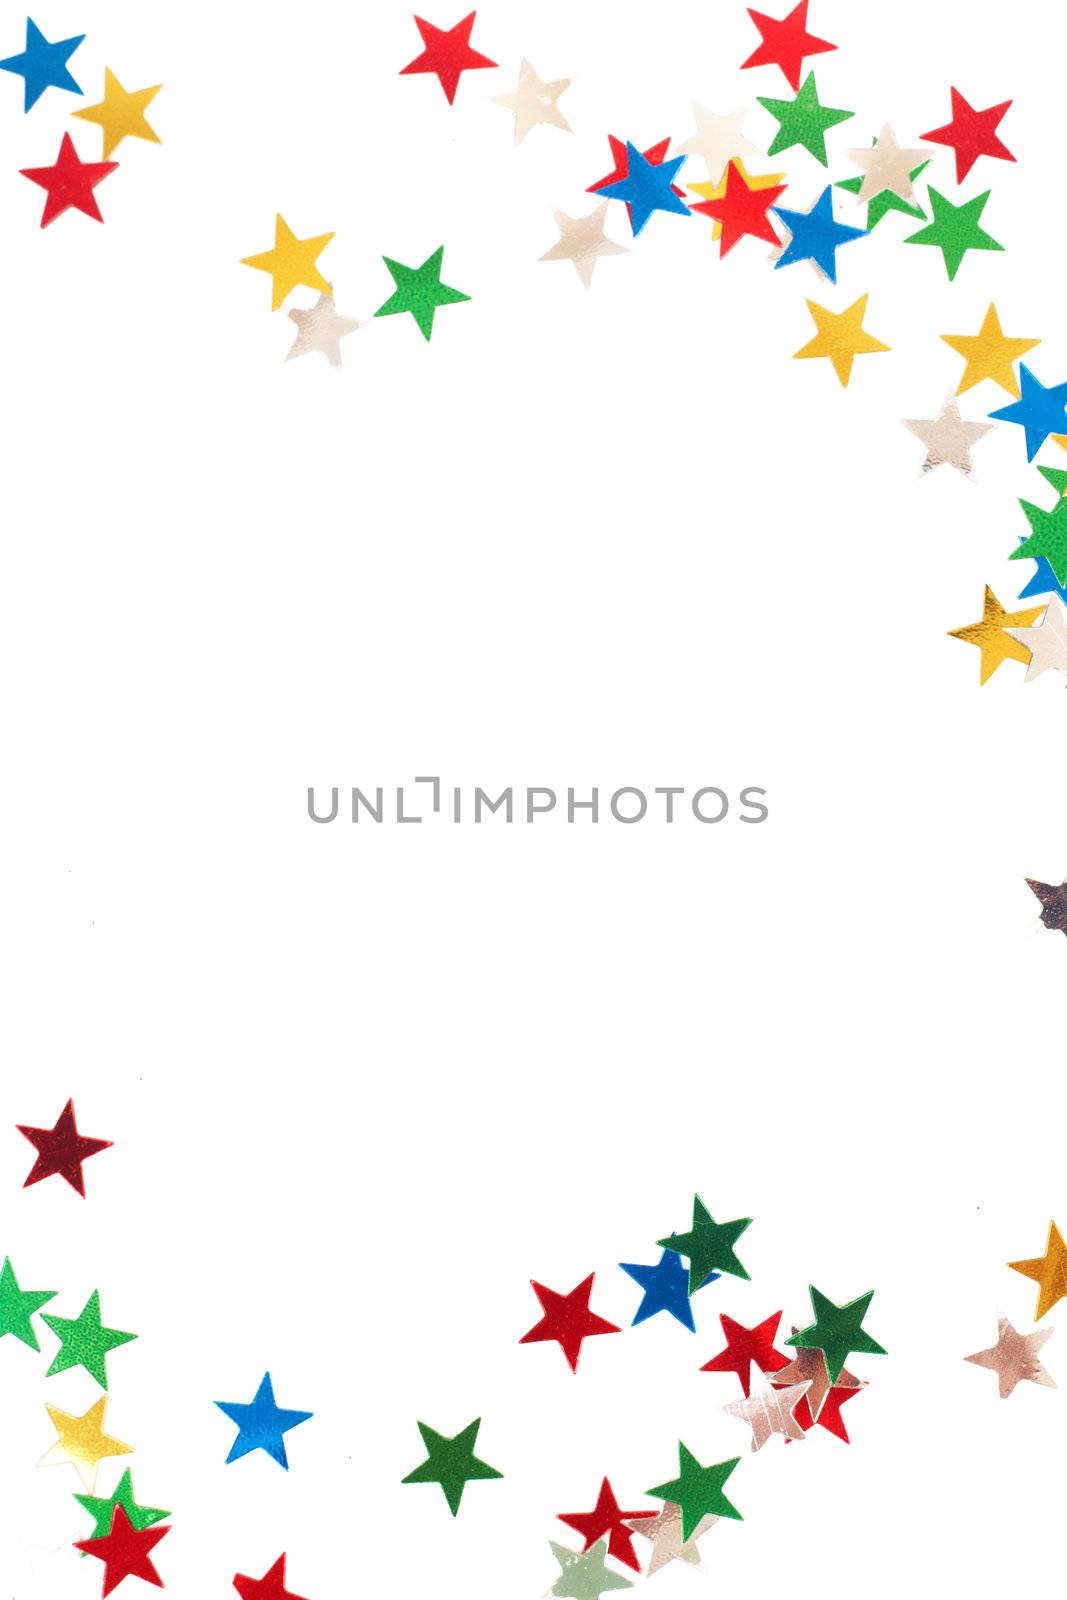 Colorful Christmas stars by Elenat